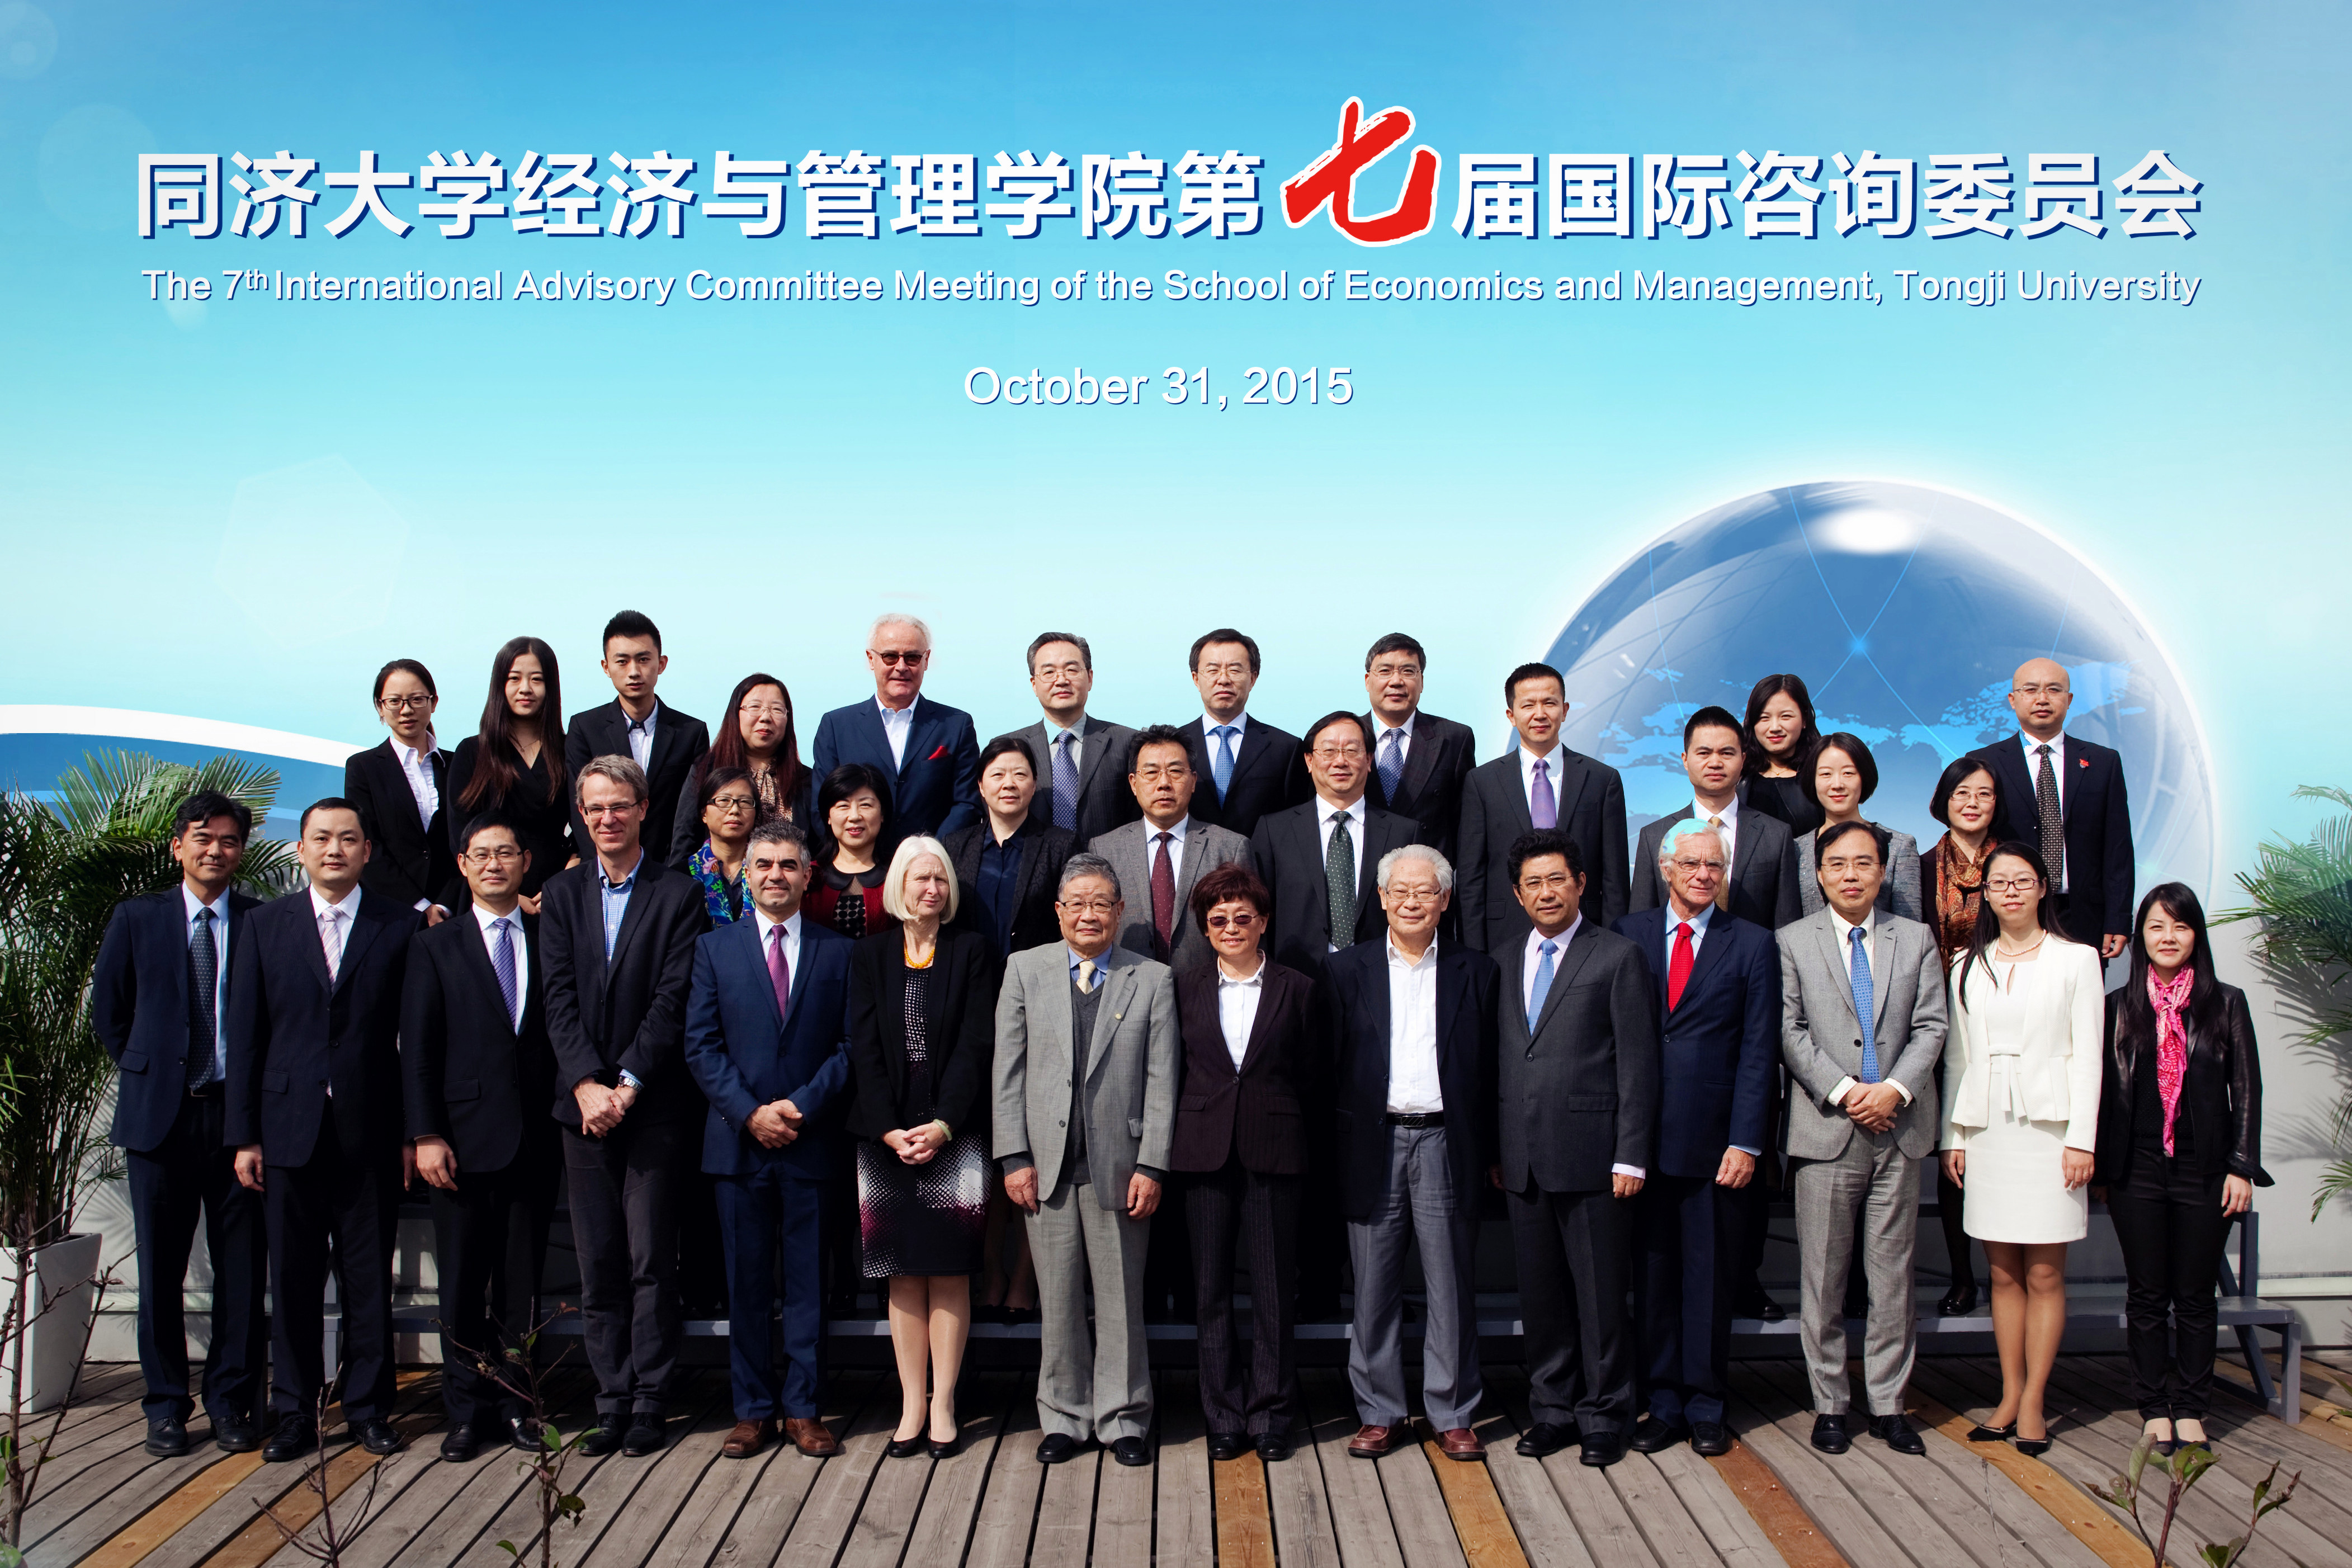 The 7th International Advisory Committee Meeting Successfully Held